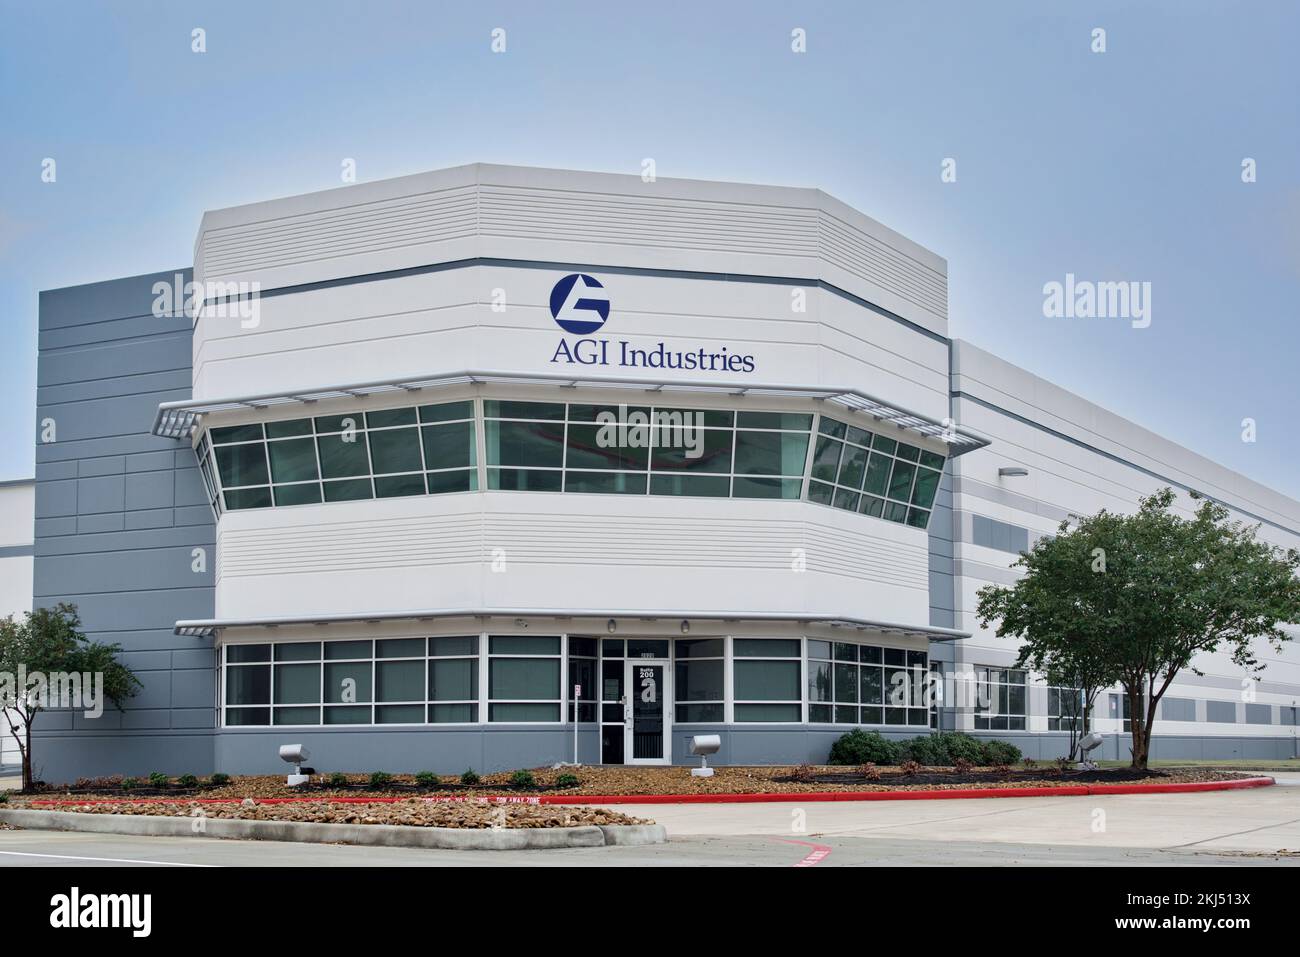 Houston, Texas USA 11-24-2022: AGI Industries office building exterior, corner view in Houston, TX. Industrial fluid handling products distributor. Stock Photo